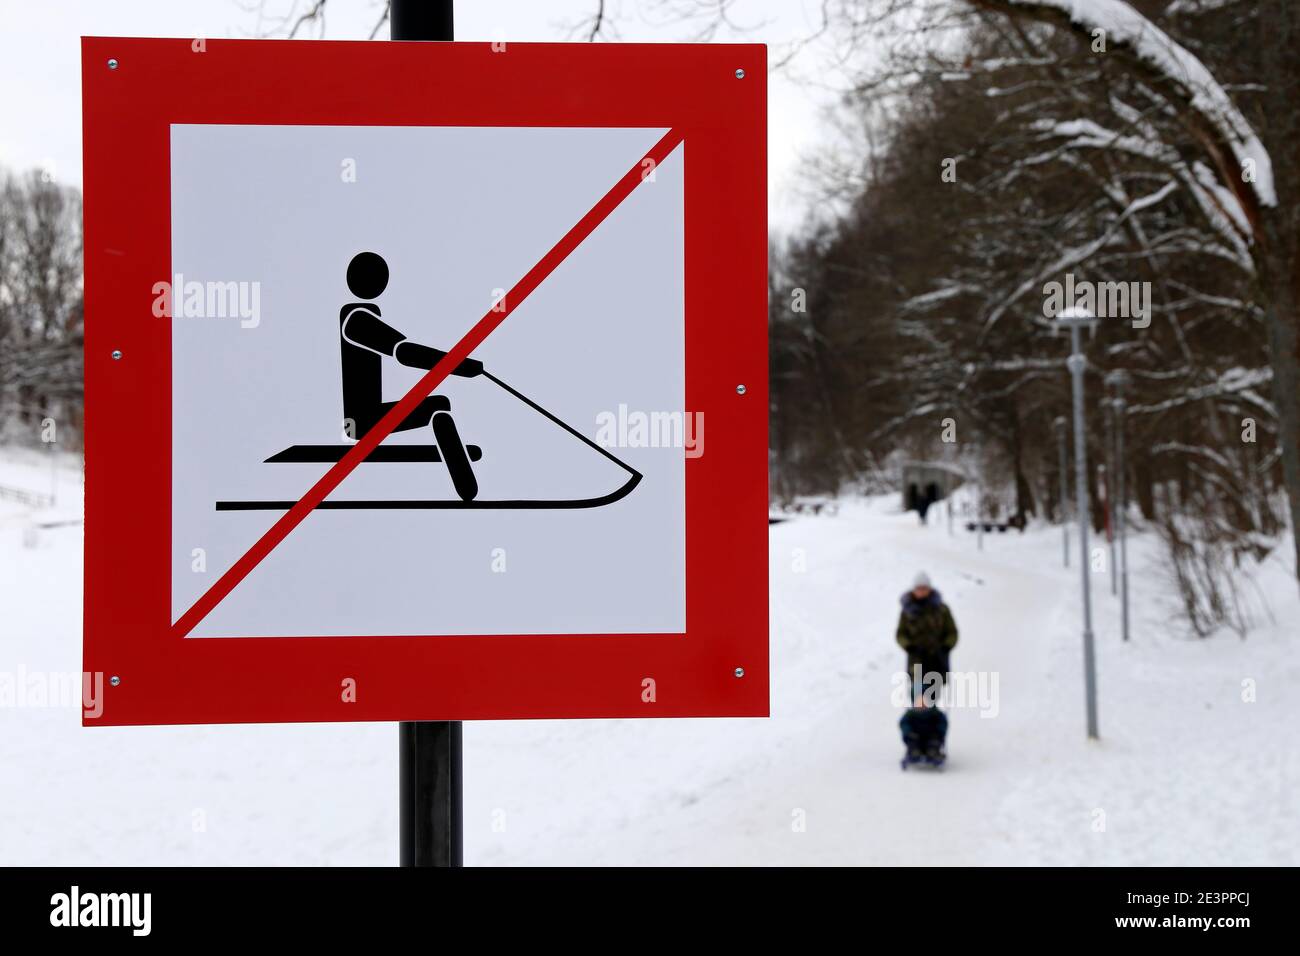 Warning sign forbidding sledding in the snowy park. Children safety during winter holidays Stock Photo